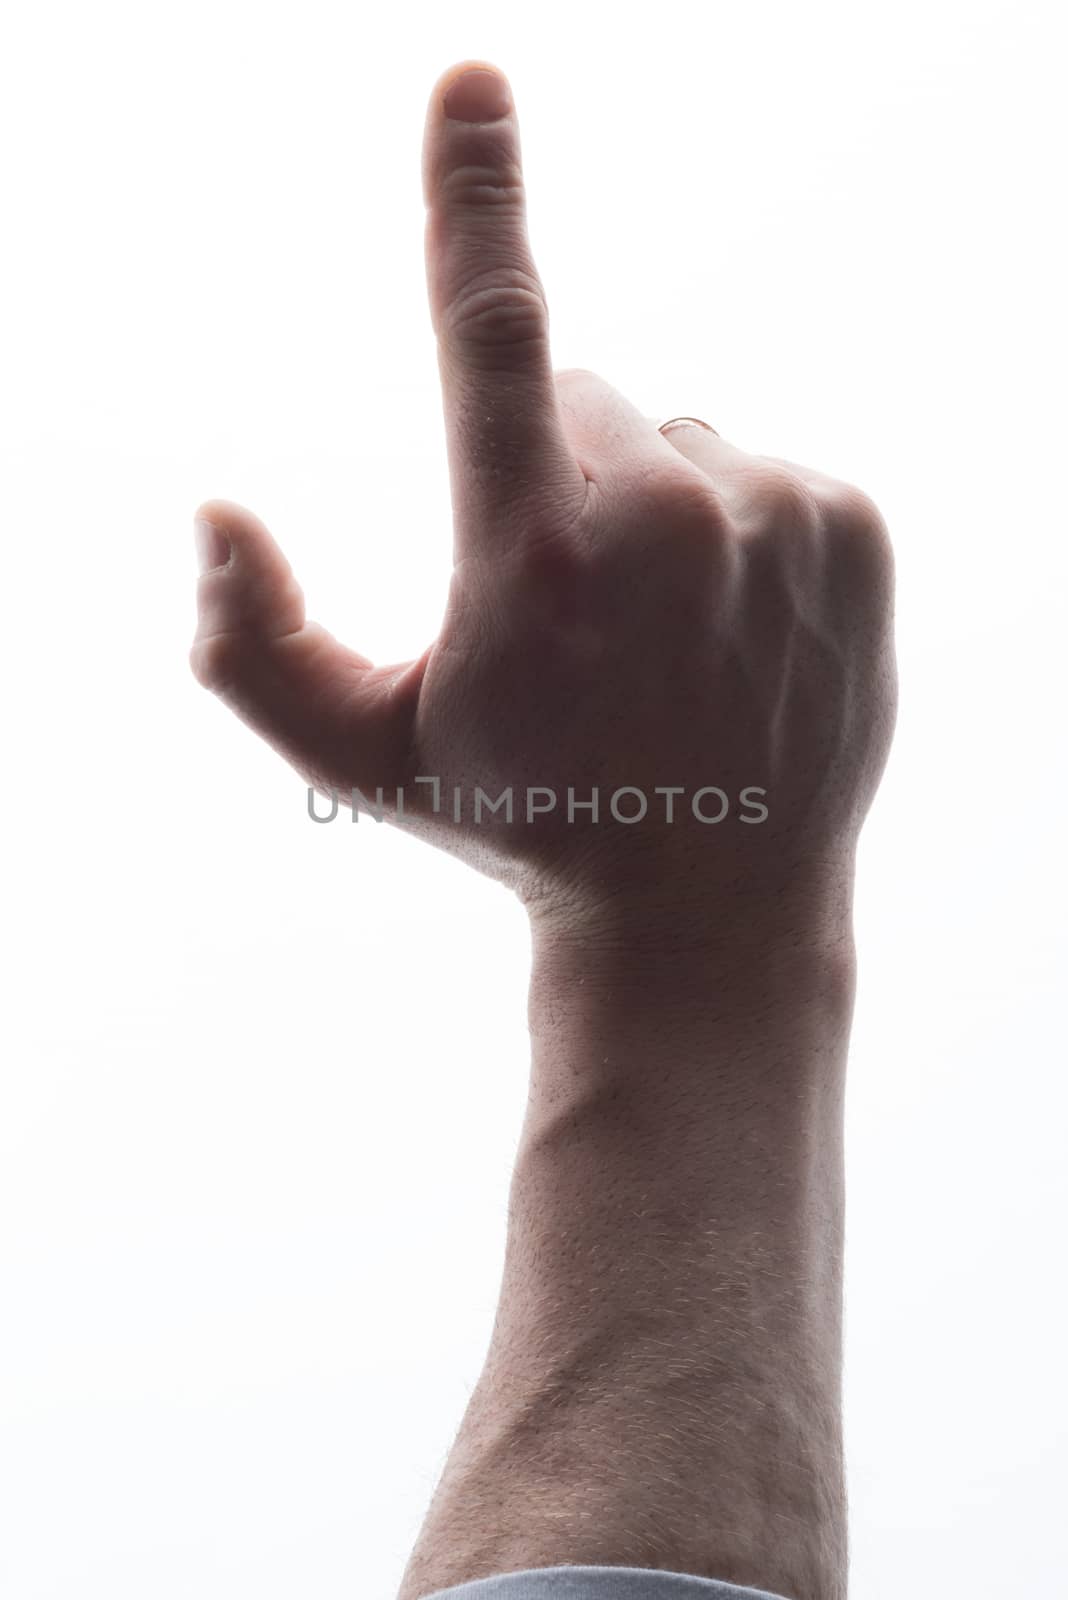 Mans hand on isolated white background, close up view